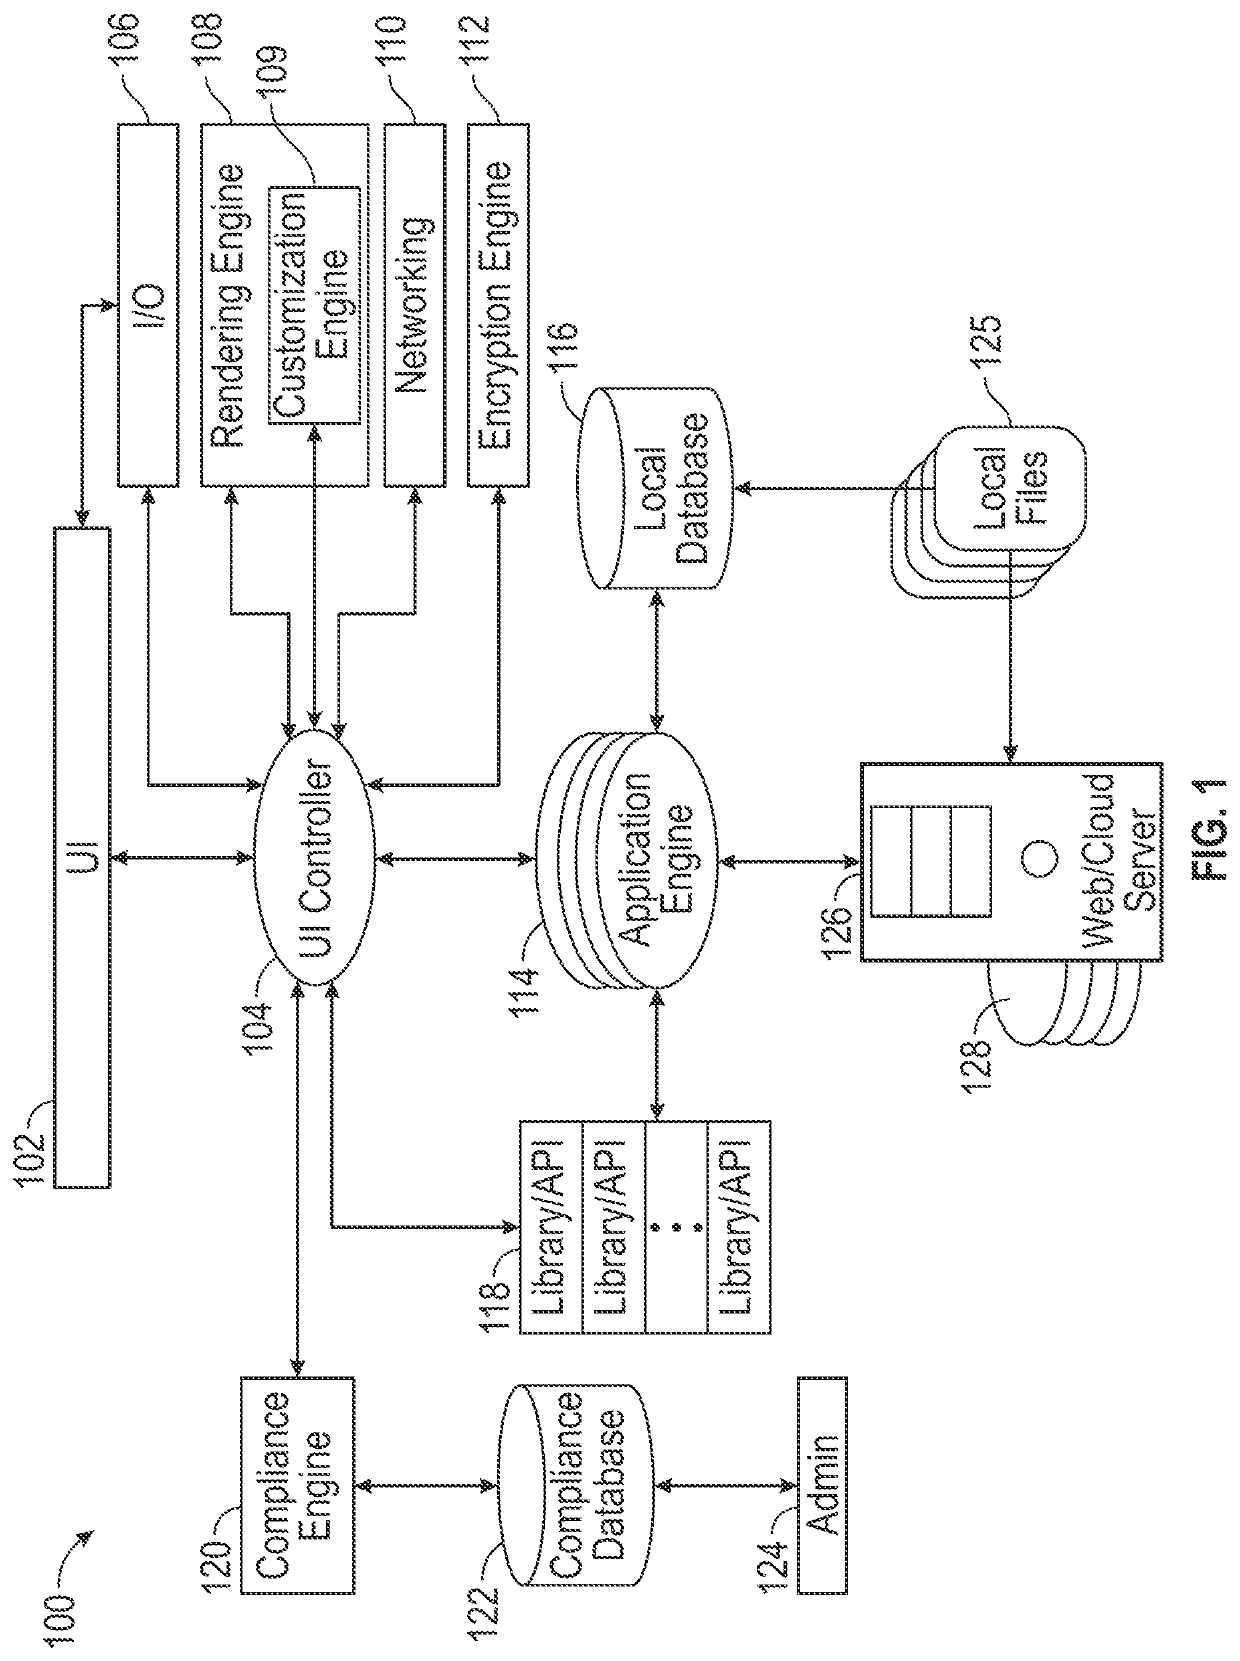 Systems and methods for regulation compliant computing